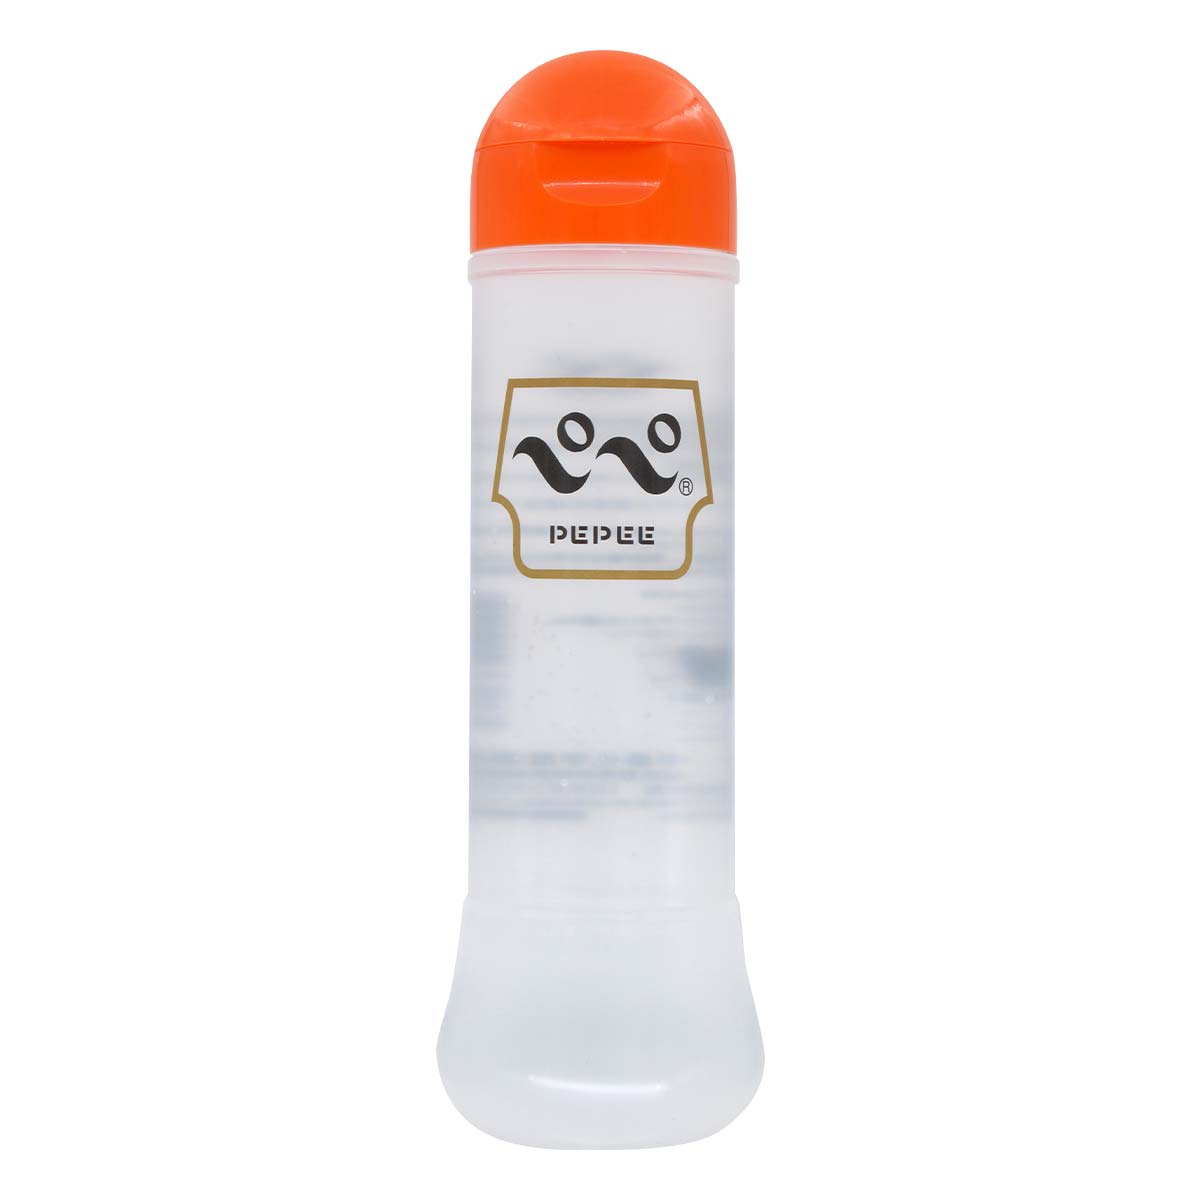 PEPEE 360 360ml water-based lubricant-p_2